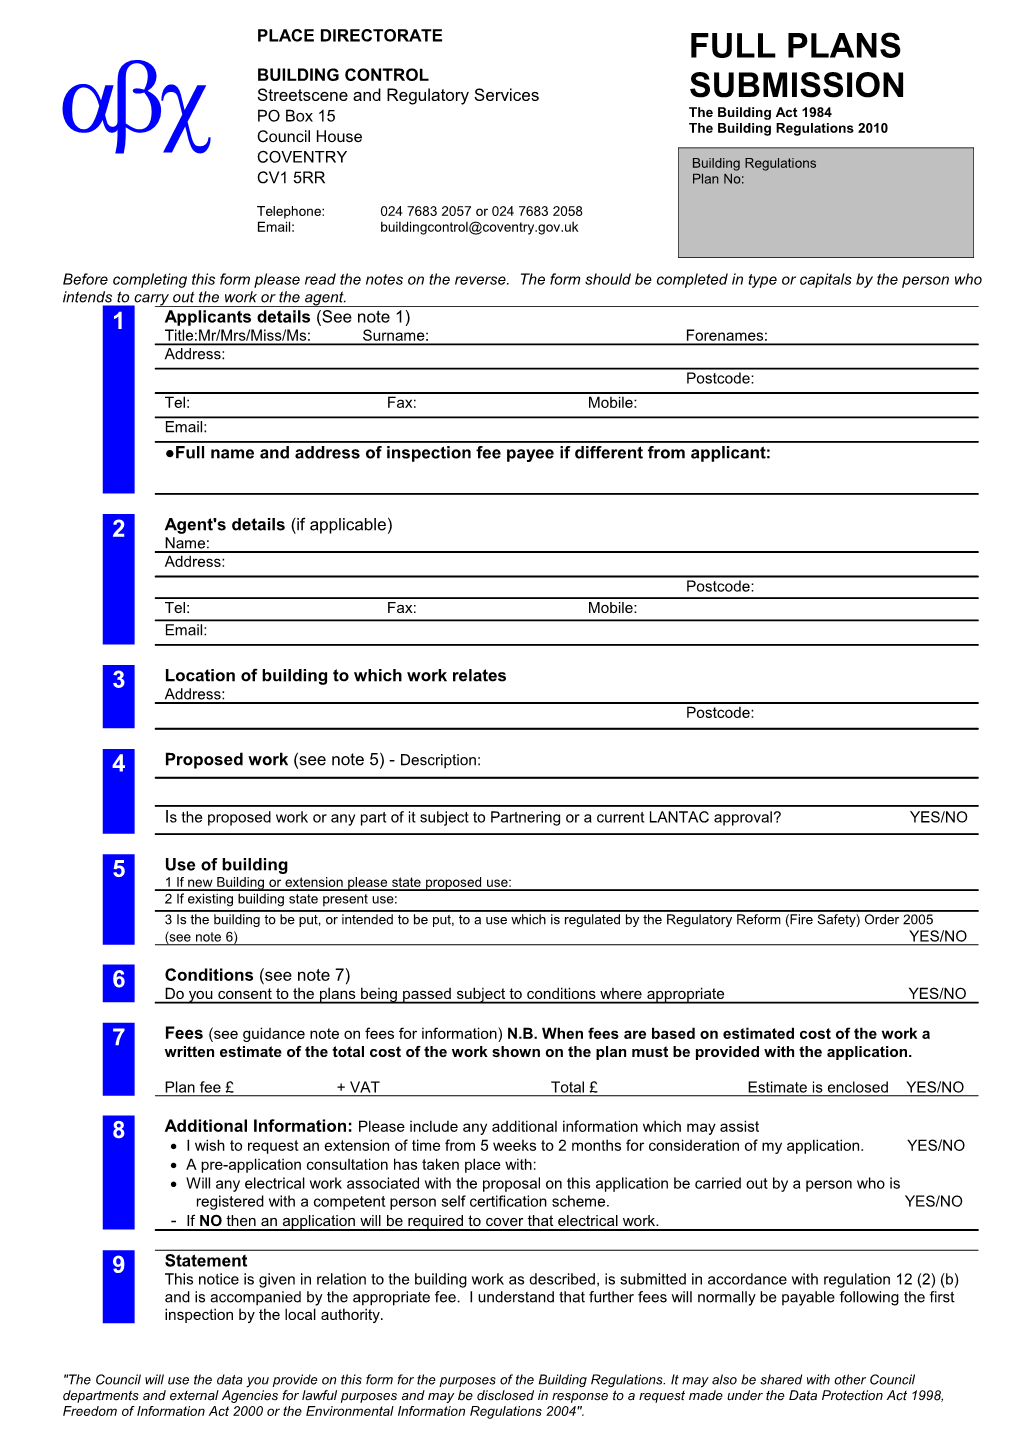 Before Completing This Form Please Read the Notes on the Reverse. the Form Should Be Completed